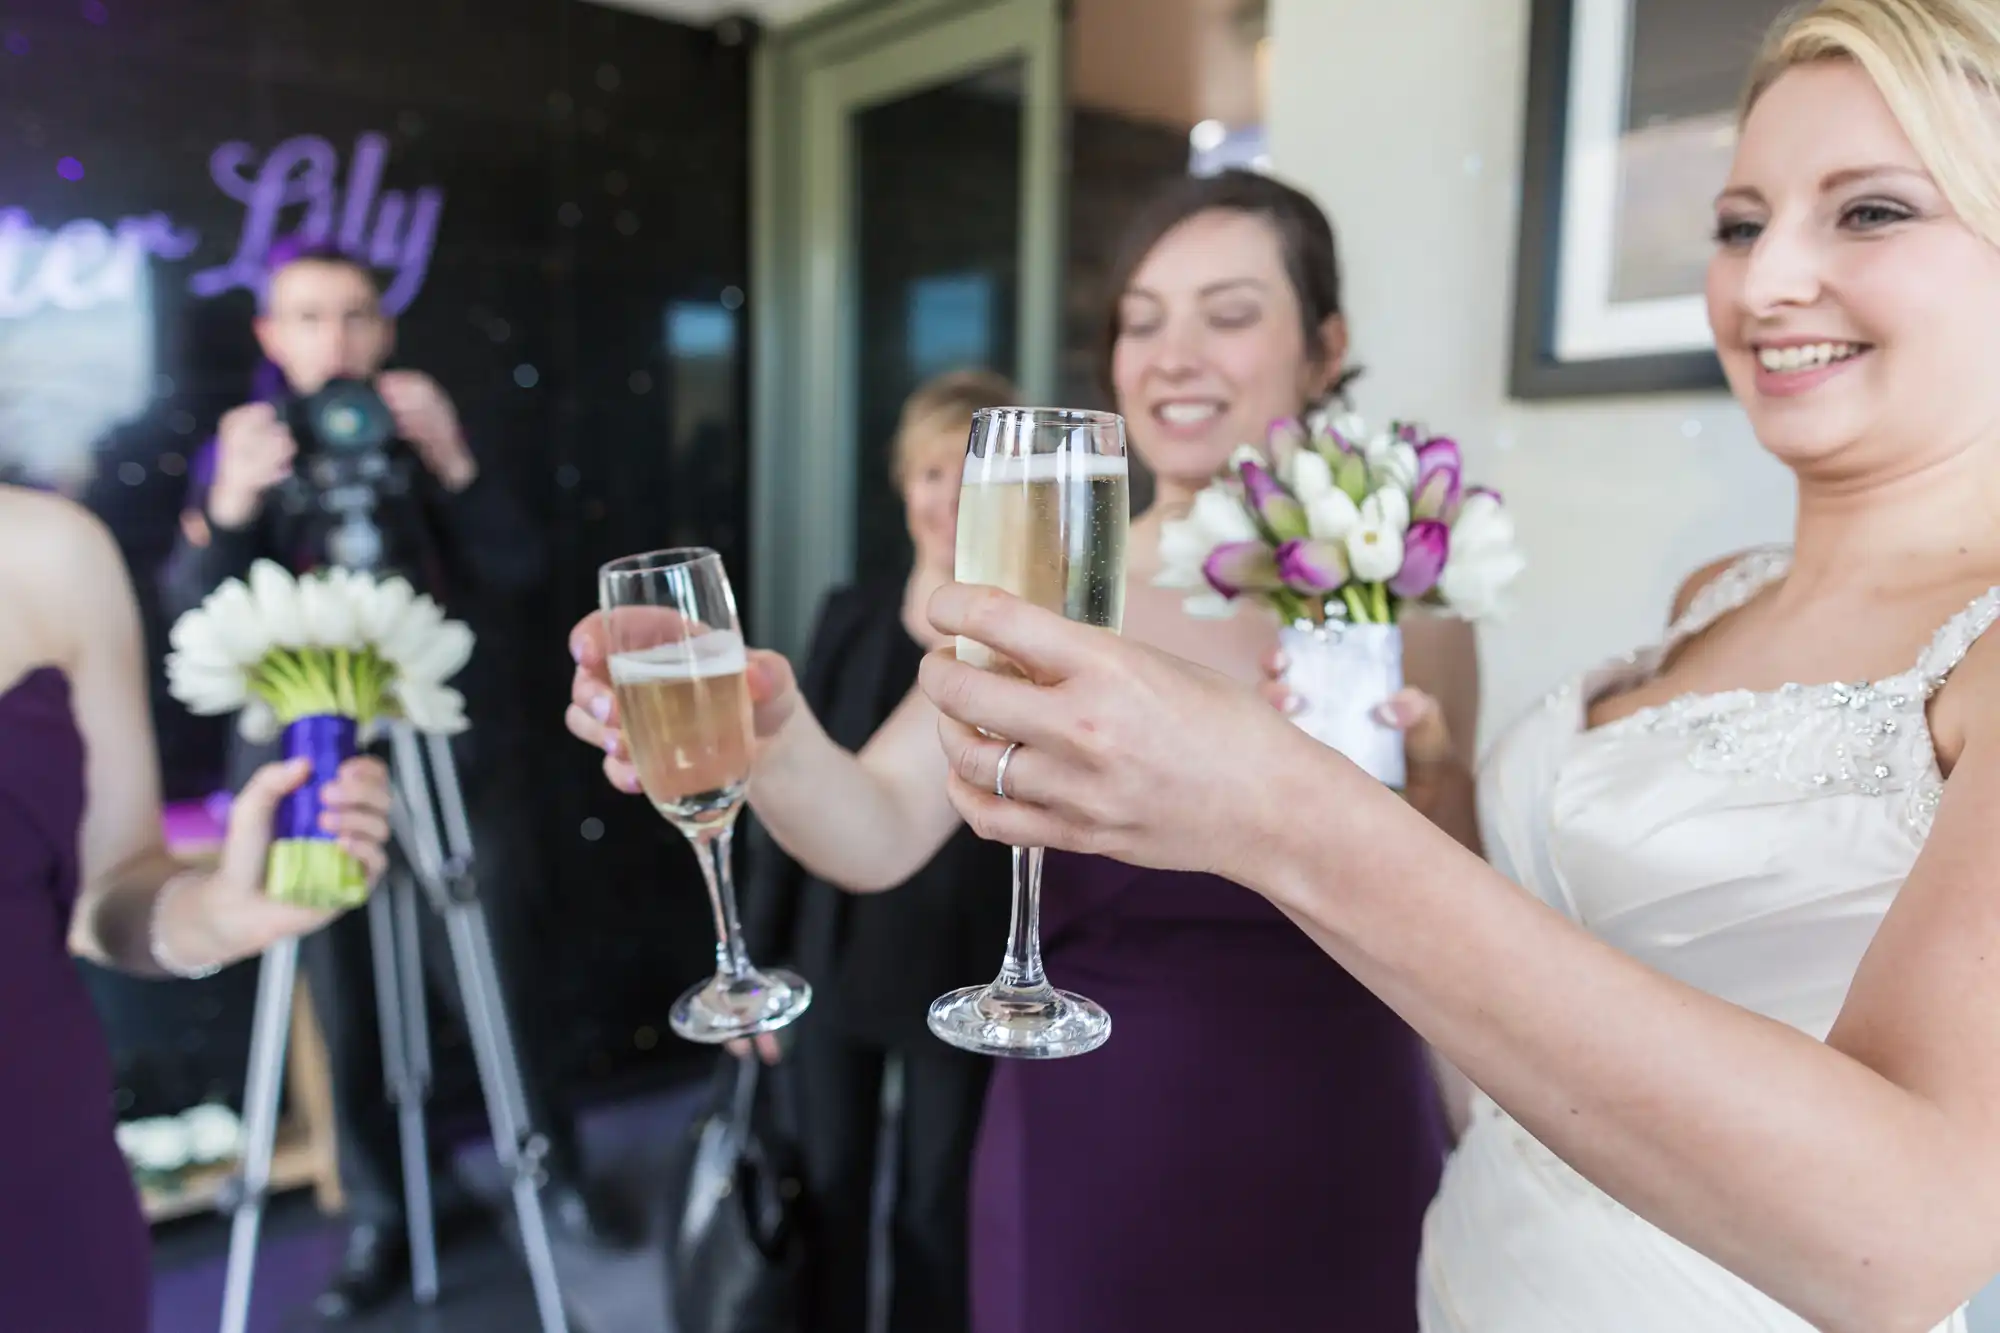 A bride in a white dress toasts with champagne, flanked by bridesmaids in purple, with a photographer capturing the moment.